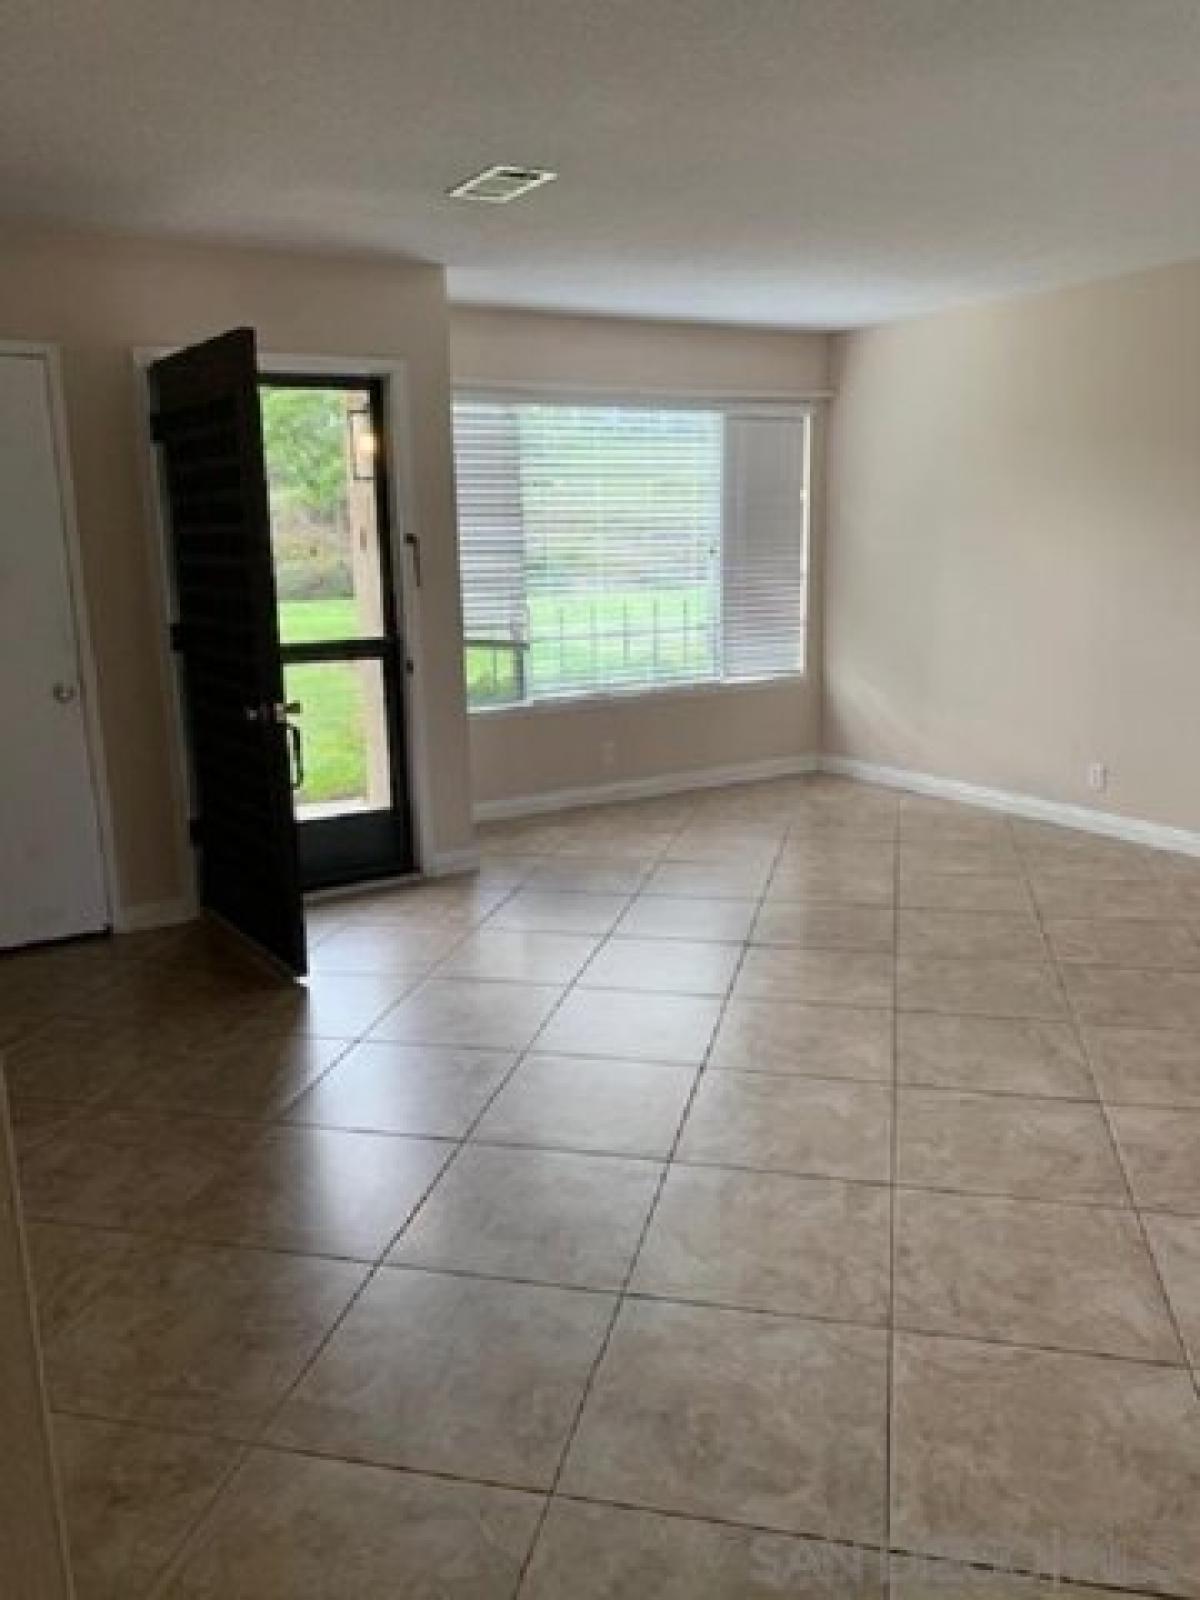 Picture of Home For Rent in Oceanside, California, United States